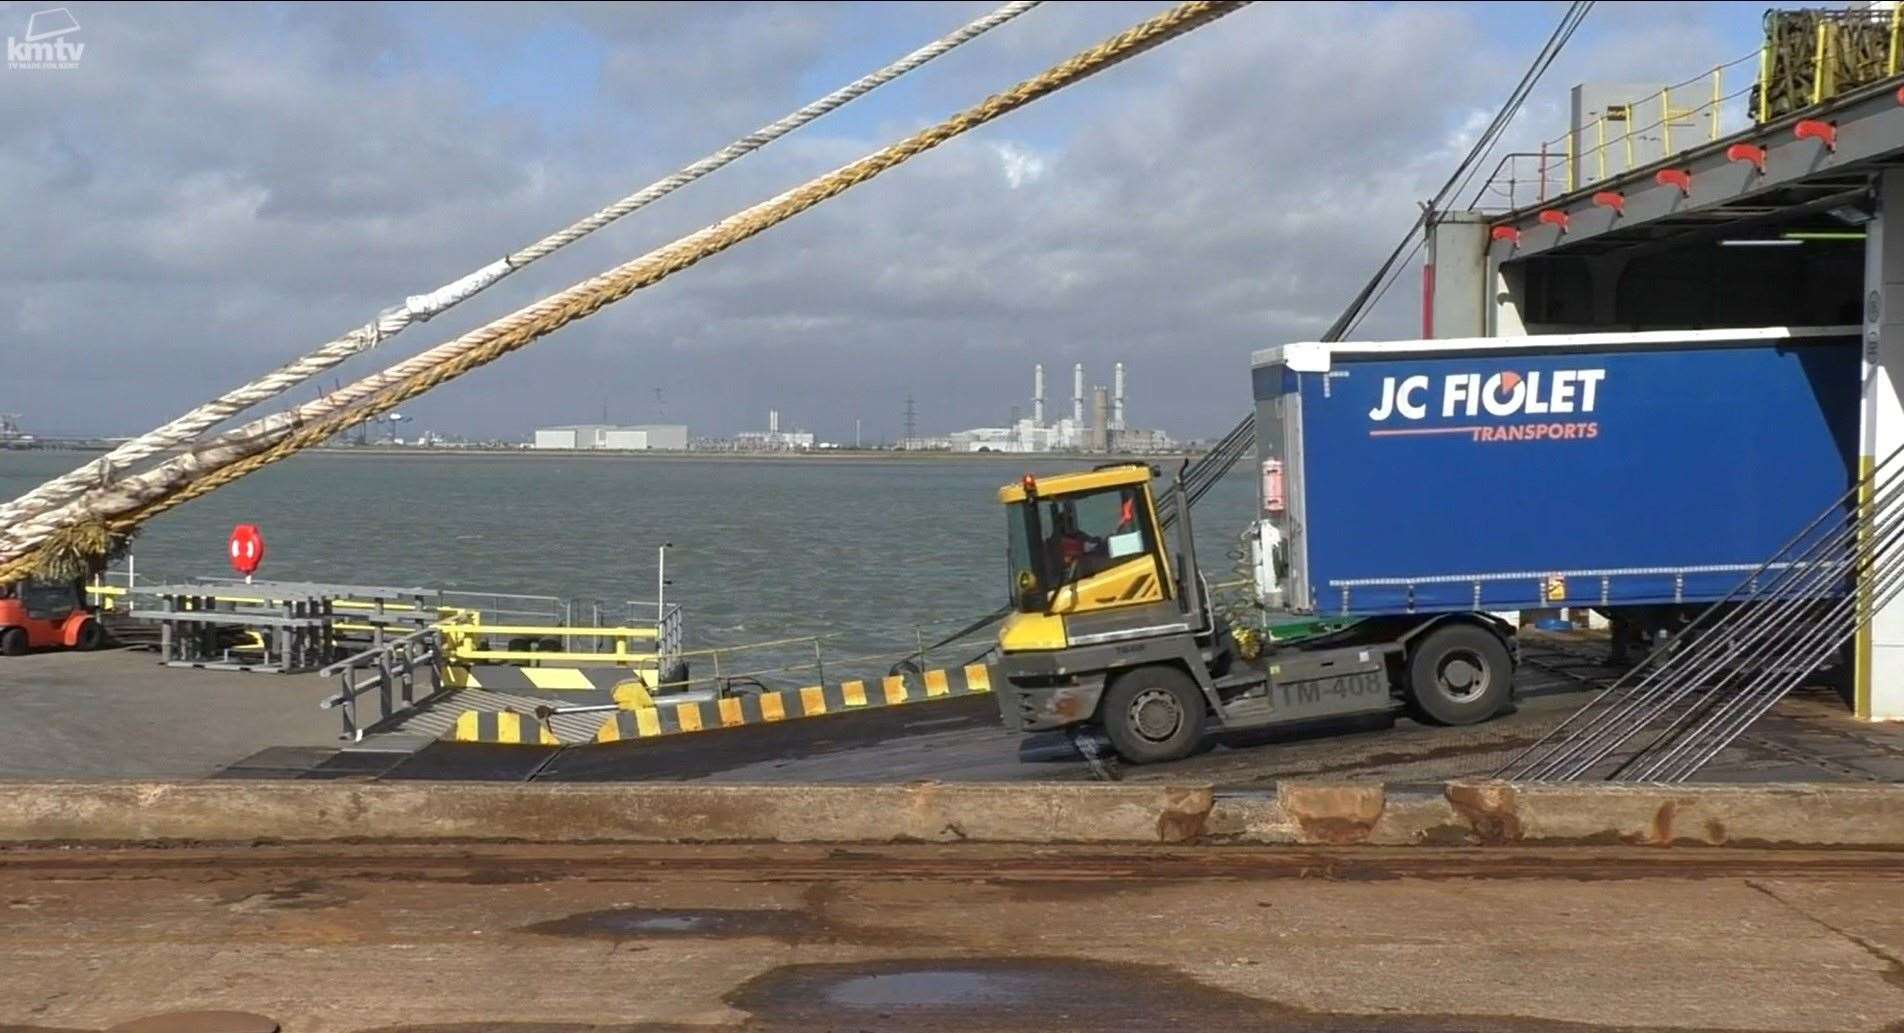 Lorry being loaded onto the new DFDS ferry at Sheerness bound for Calais, France. Picture: KMTV